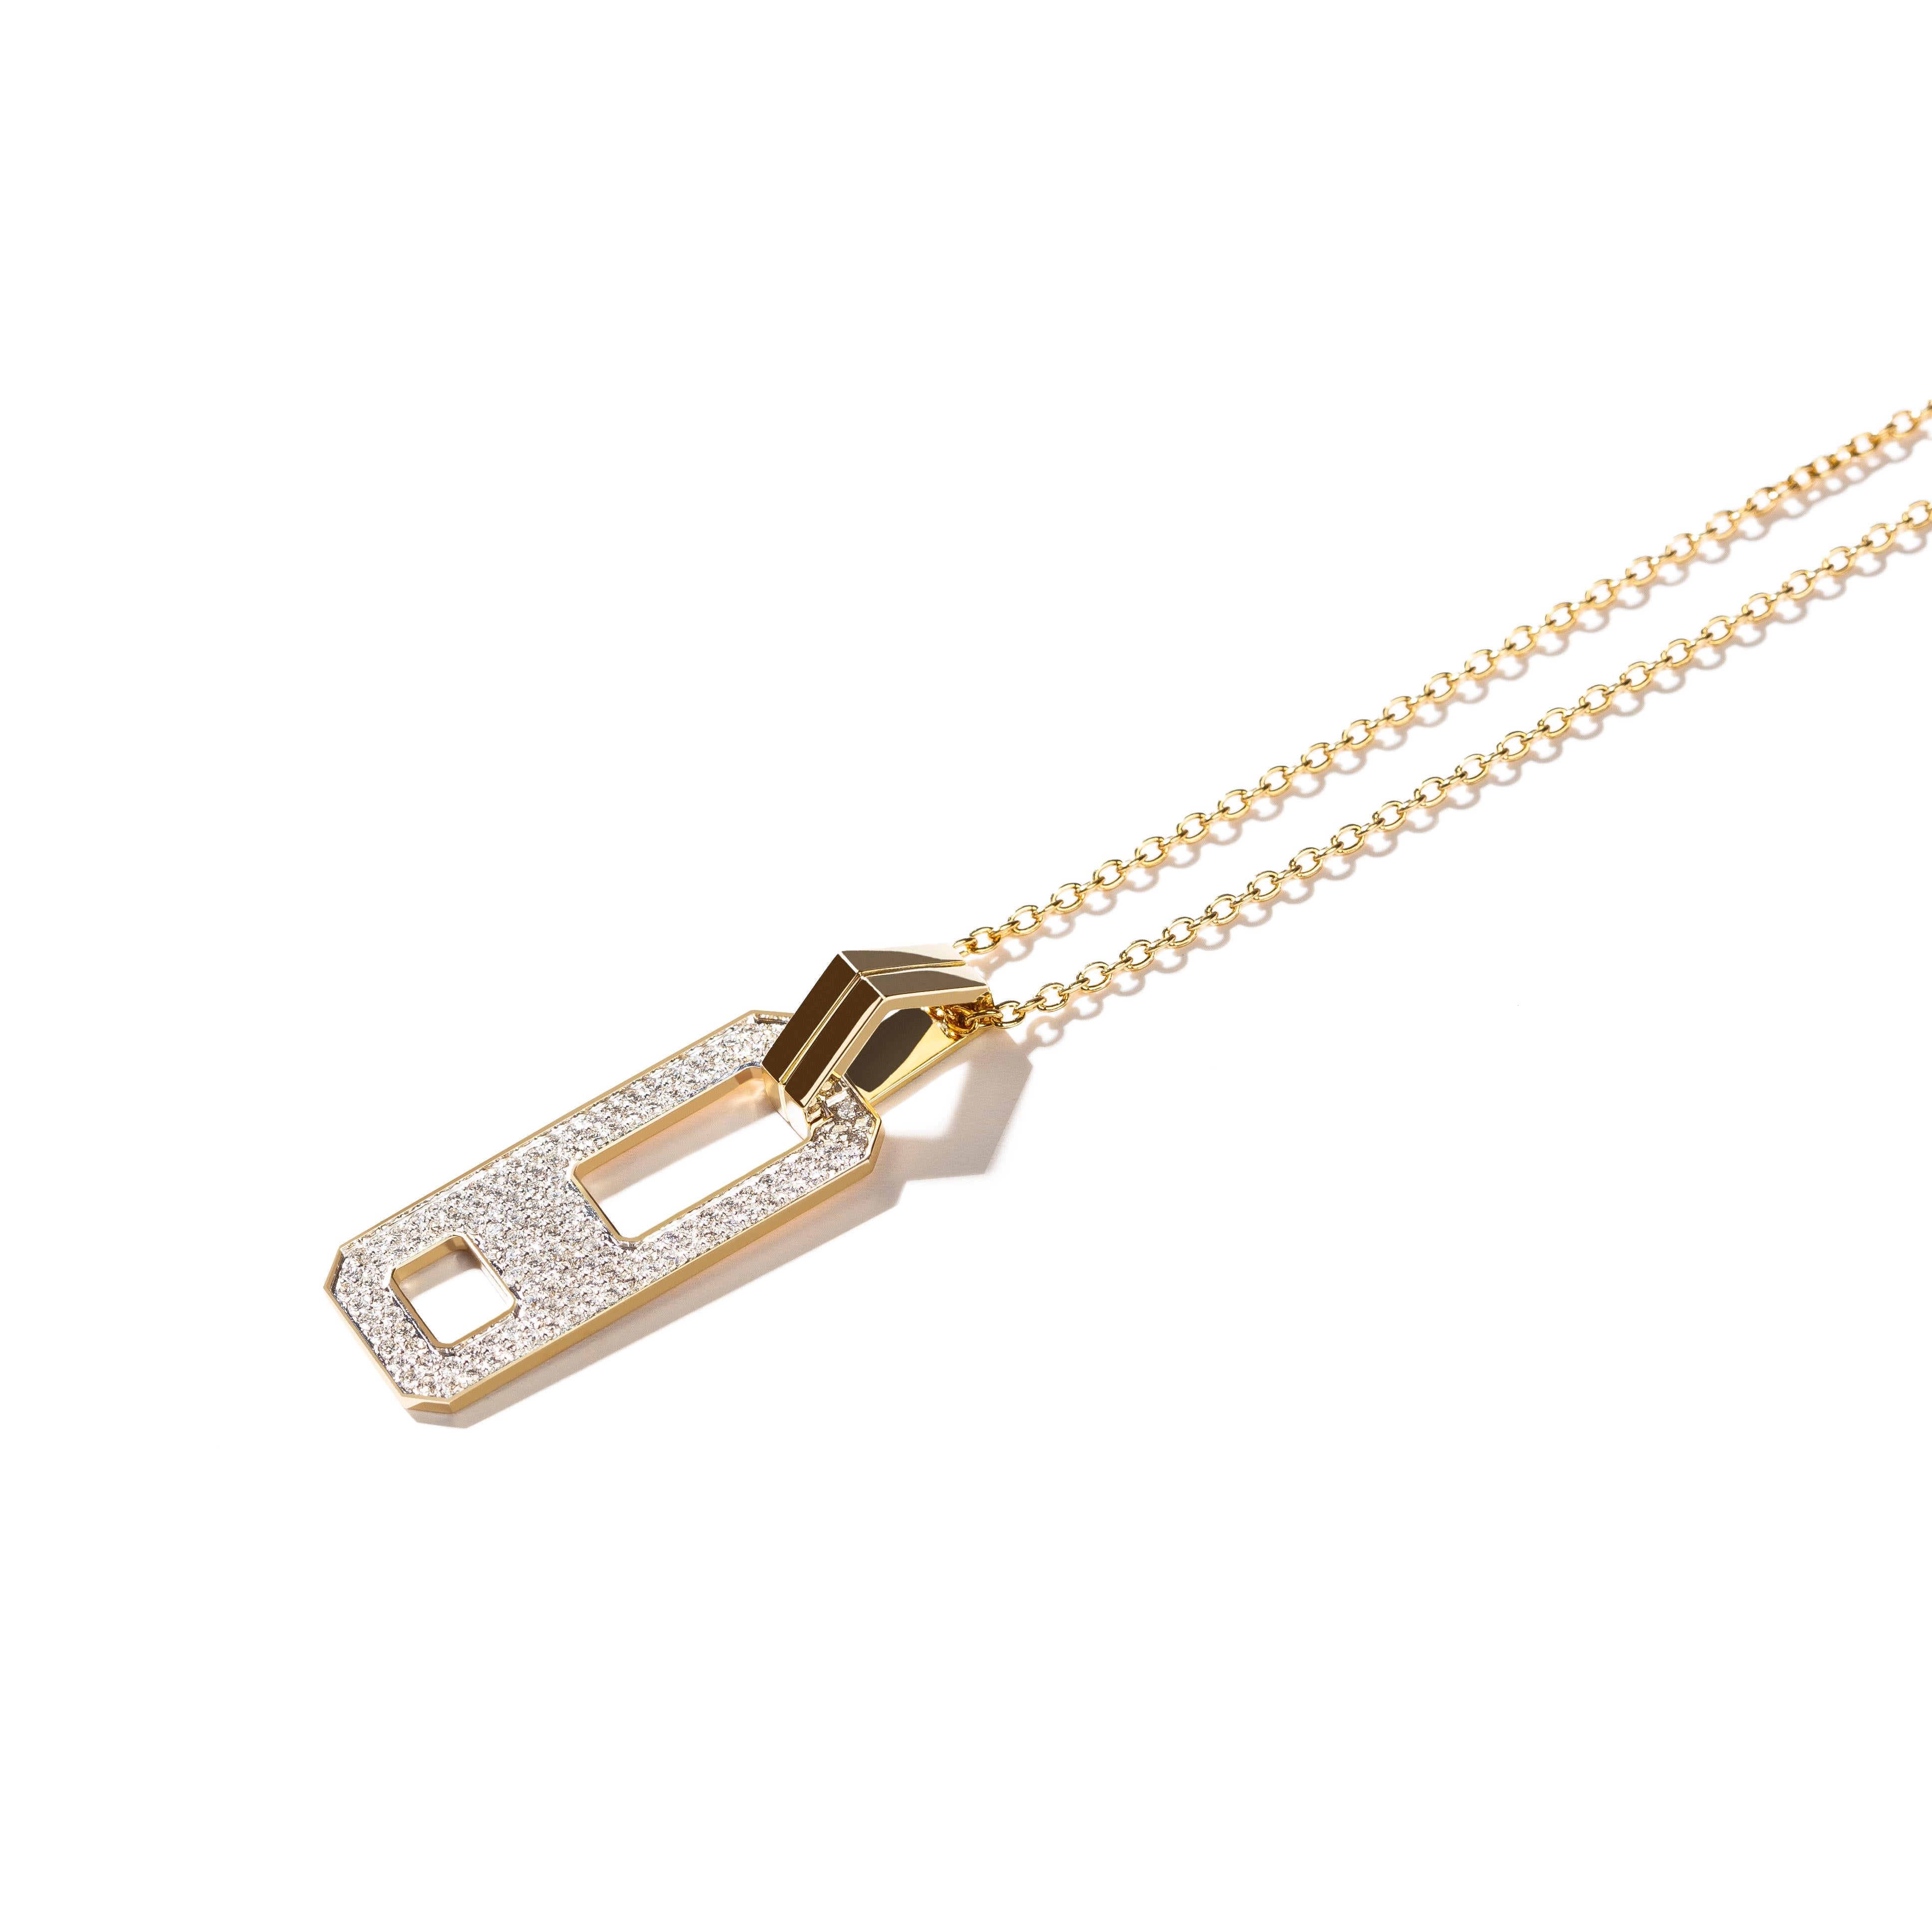 From our just landed DNA collection, this classic pendant will become an everyday essential

Crafted in 18k gold, this piece features a unique pave diamond pendant and a solid gold bail. A piece like no other, let this style shine on its own or pair